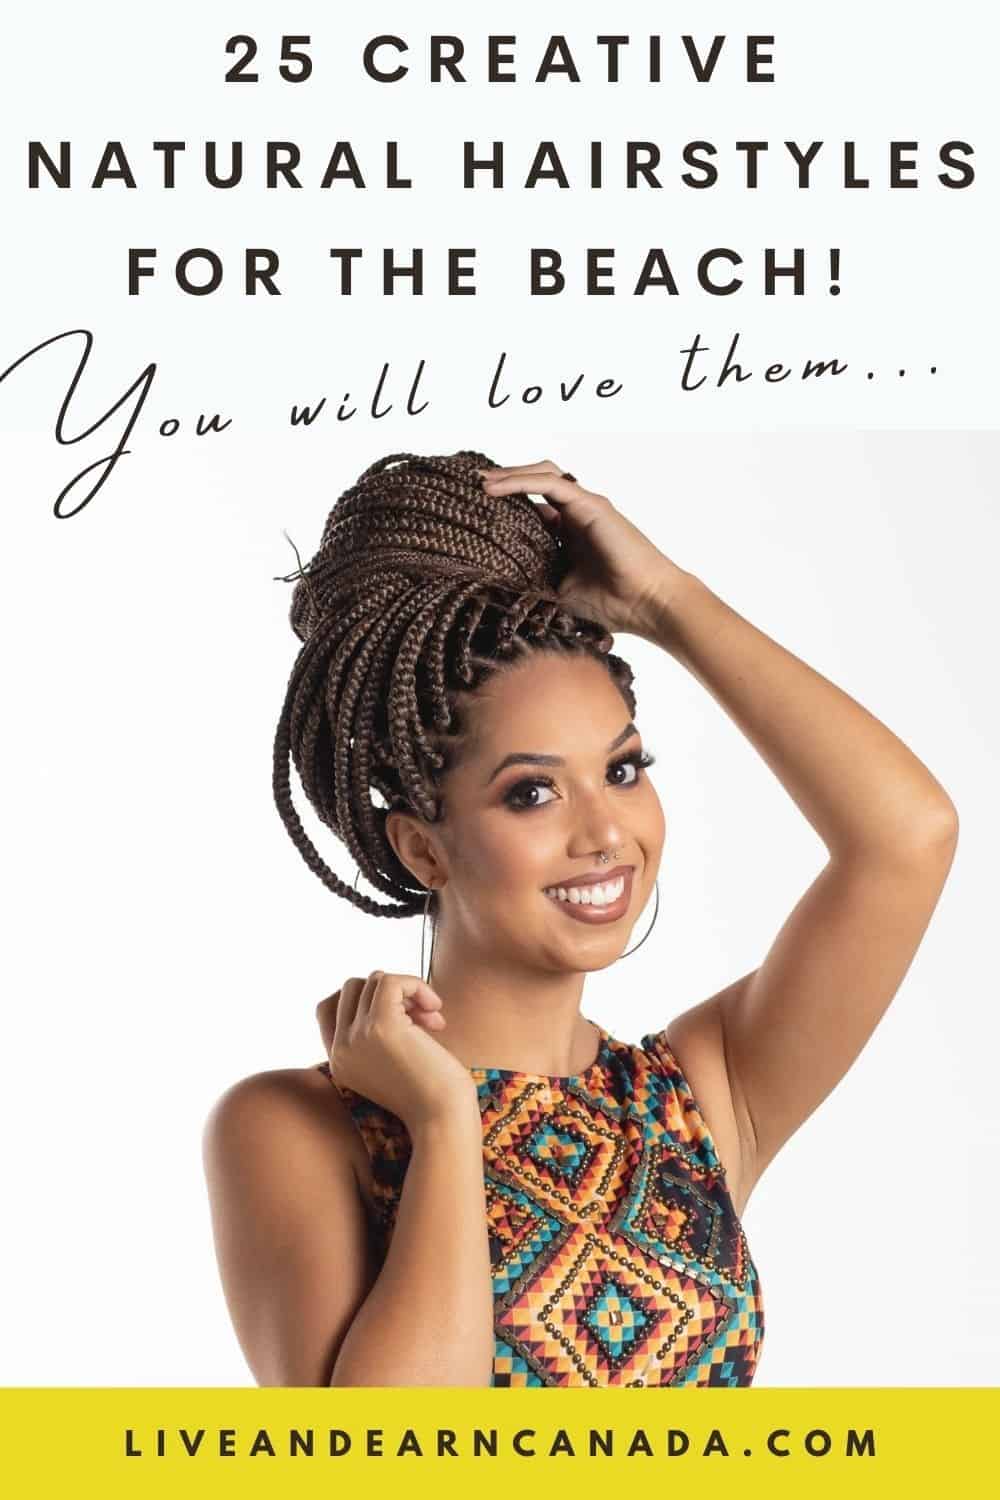 What is the best way to wear your hair when swimming? Definitely in a protective style. natural hairstyles for swimming protective styles that work when you are on the beach for black women.